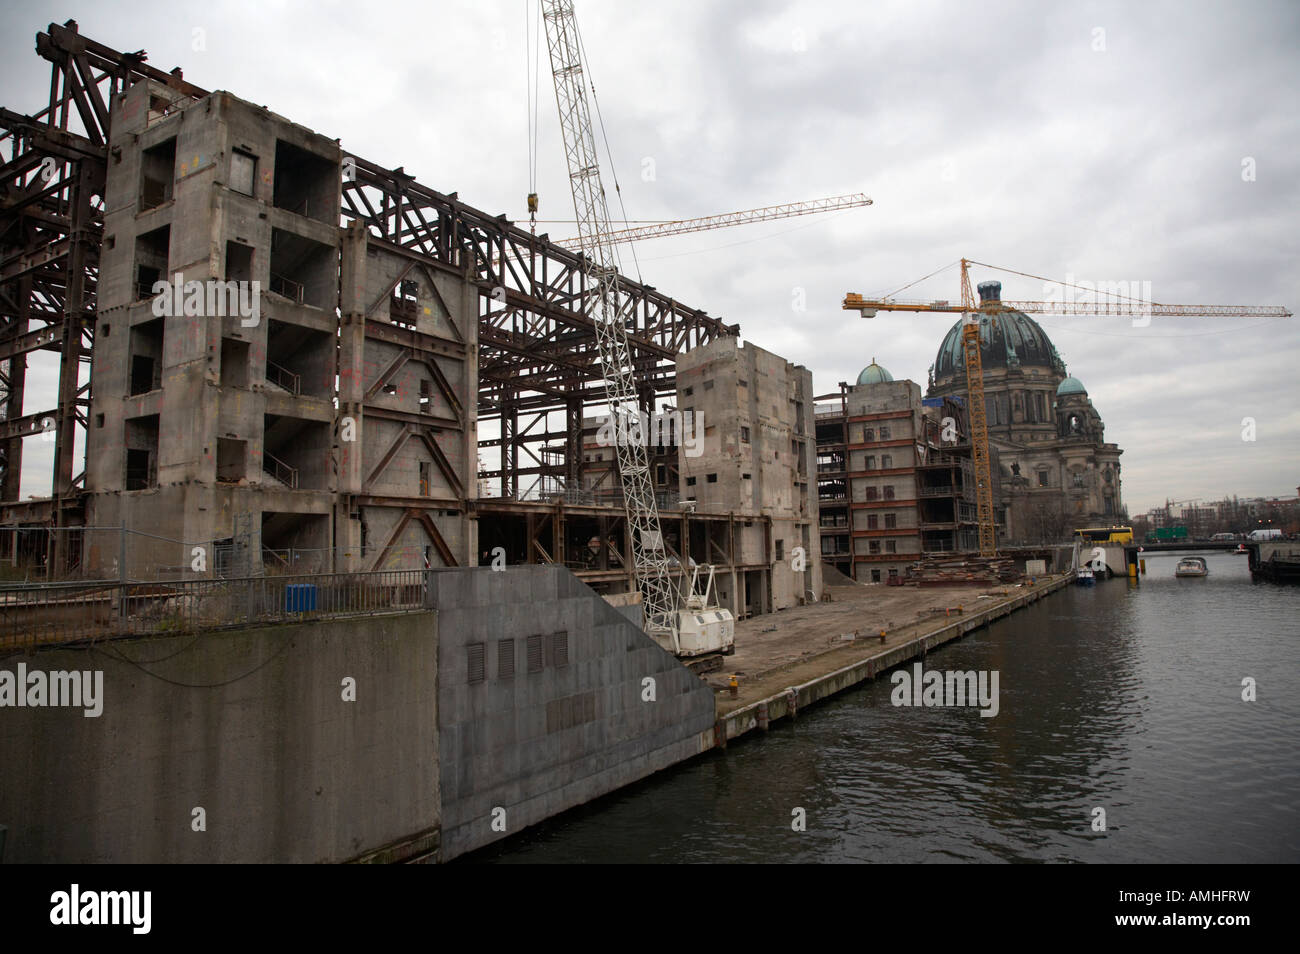 demolition of the Palast der Republik on the bank of the river Spree with the Berliner Dom in the background Berlin Germany Stock Photo